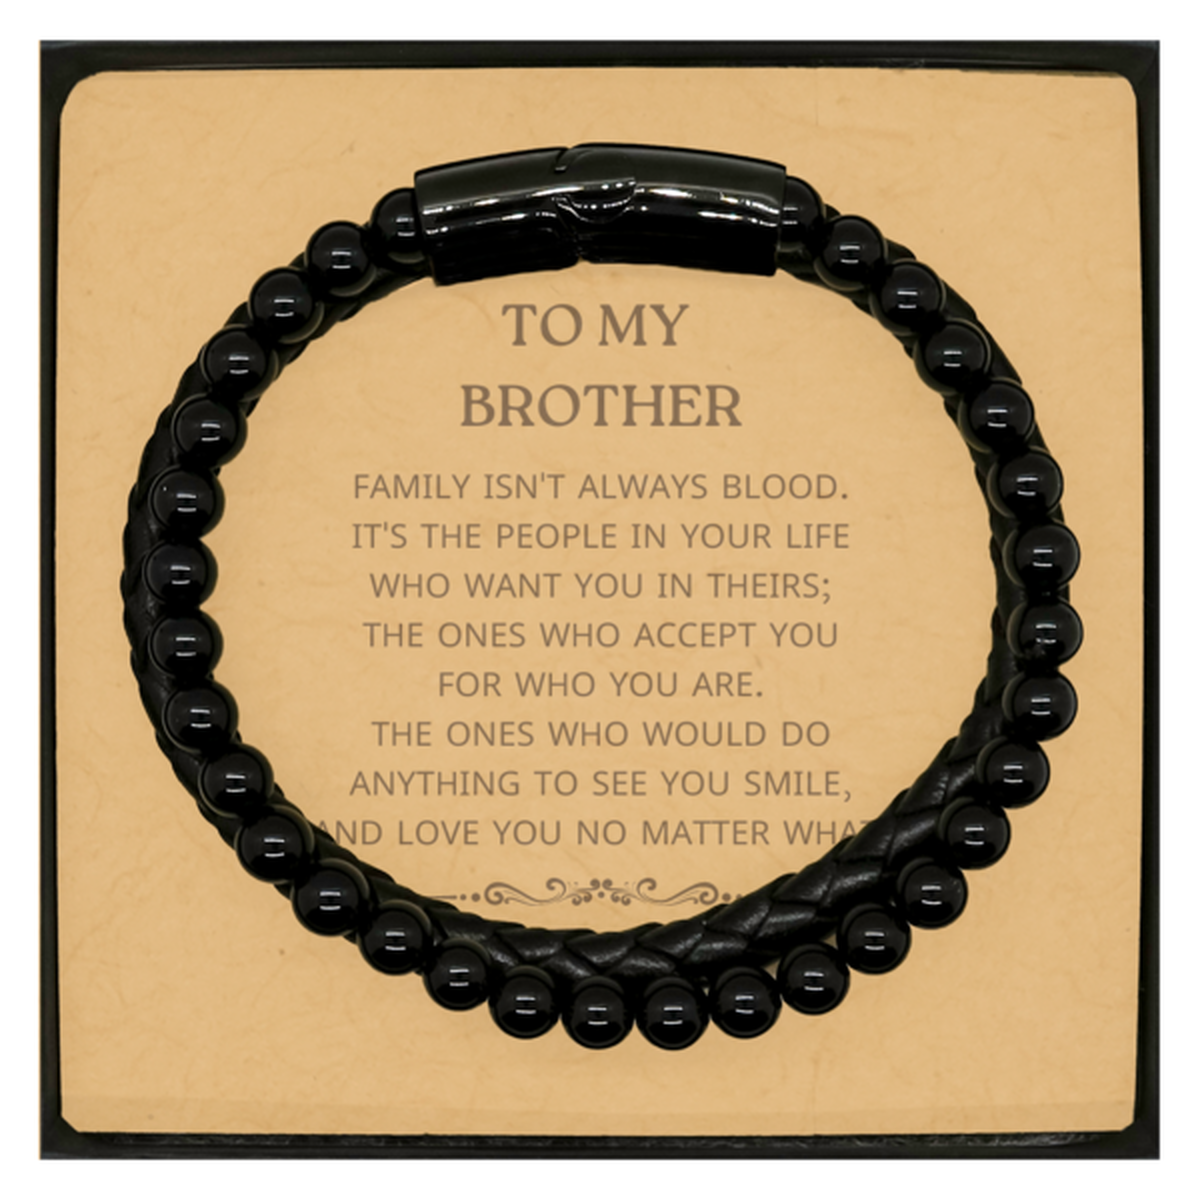 To My Brother Gifts, Family isn't always blood, Brother Stone Leather Bracelets, Birthday Christmas Unique Present For Brother